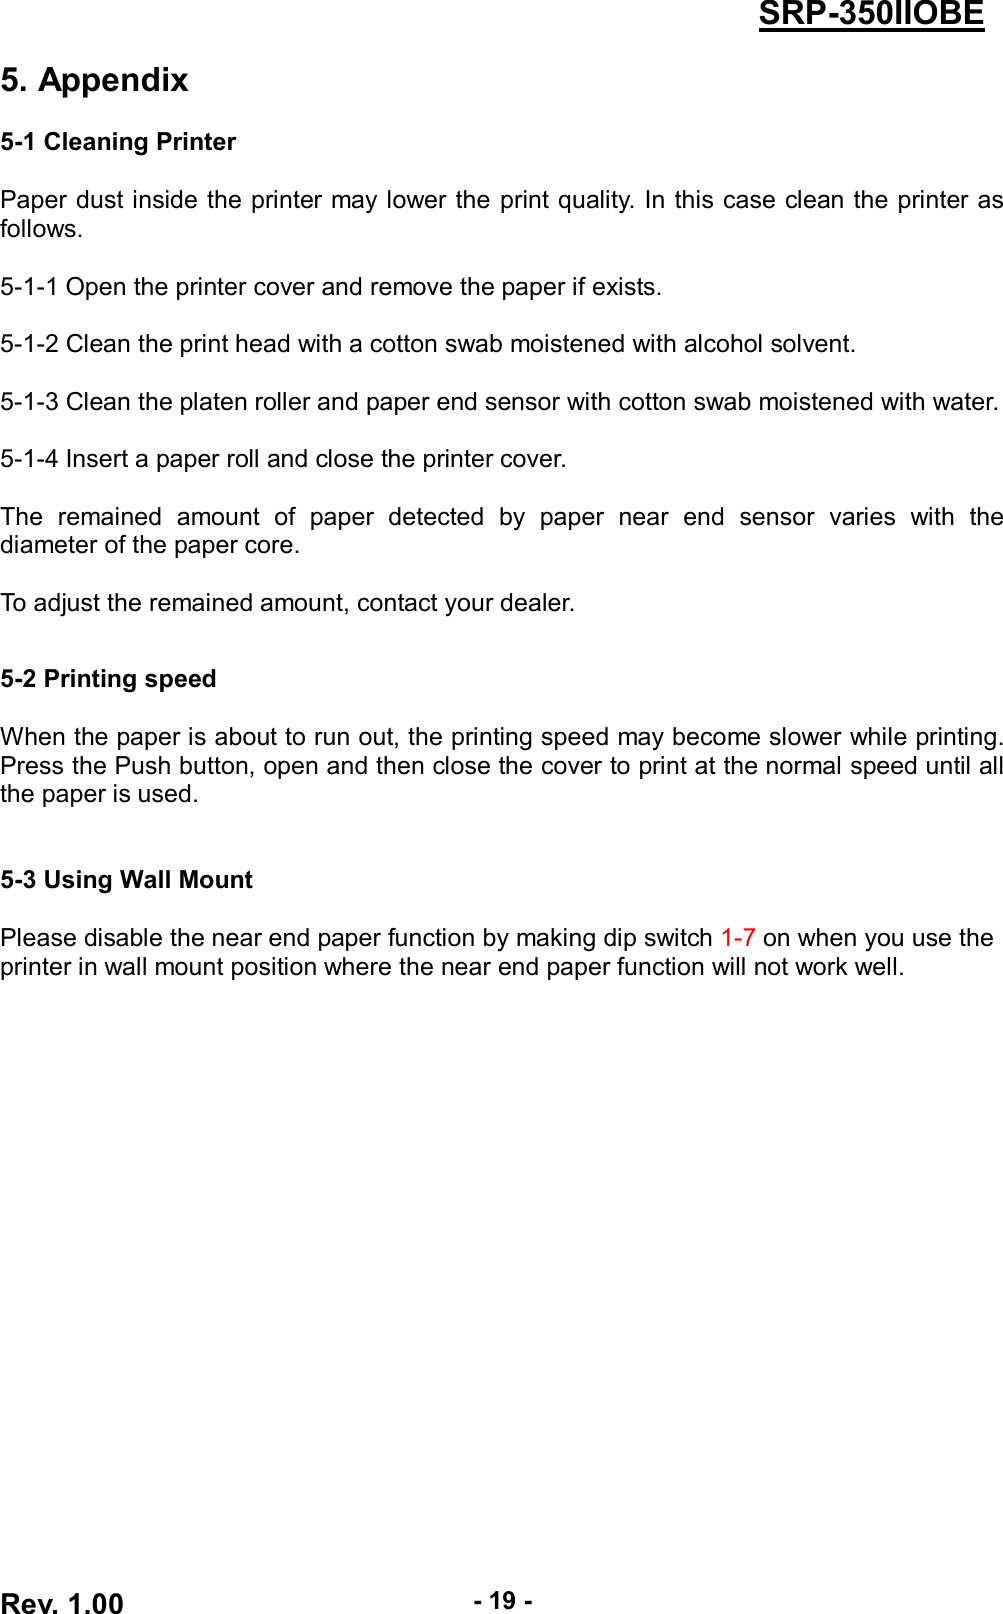  Rev. 1.00 - 19 - SRP-350IIOBE 5. Appendix  5-1 Cleaning Printer  Paper dust inside the printer may lower the print quality. In this case clean the printer as follows.  5-1-1 Open the printer cover and remove the paper if exists.  5-1-2 Clean the print head with a cotton swab moistened with alcohol solvent.  5-1-3 Clean the platen roller and paper end sensor with cotton swab moistened with water.  5-1-4 Insert a paper roll and close the printer cover.  The  remained  amount  of  paper  detected  by  paper  near  end  sensor  varies  with  the diameter of the paper core.  To adjust the remained amount, contact your dealer.   5-2 Printing speed  When the paper is about to run out, the printing speed may become slower while printing. Press the Push button, open and then close the cover to print at the normal speed until all the paper is used.   5-3 Using Wall Mount  Please disable the near end paper function by making dip switch 1-7 on when you use the printer in wall mount position where the near end paper function will not work well.  